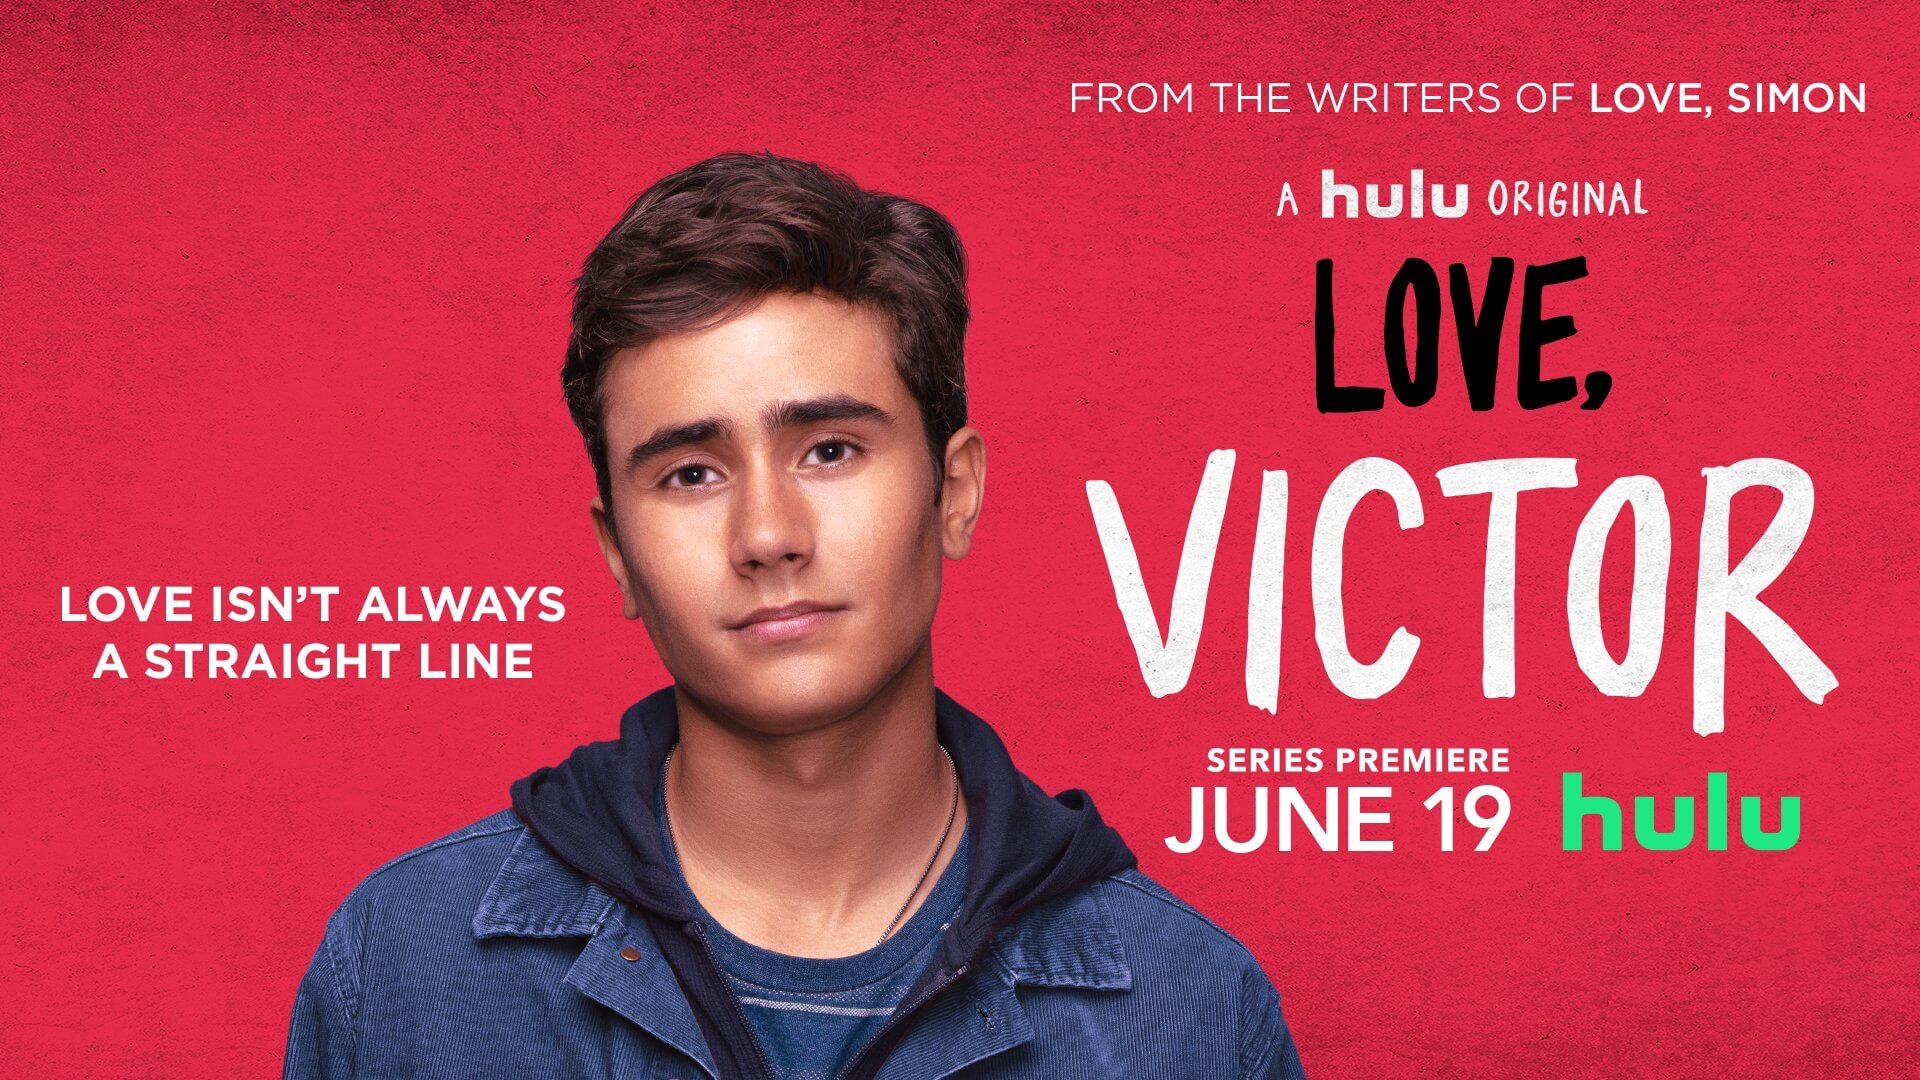 Hulu Releases The Charming First Trailer For ‘Love, Victor’